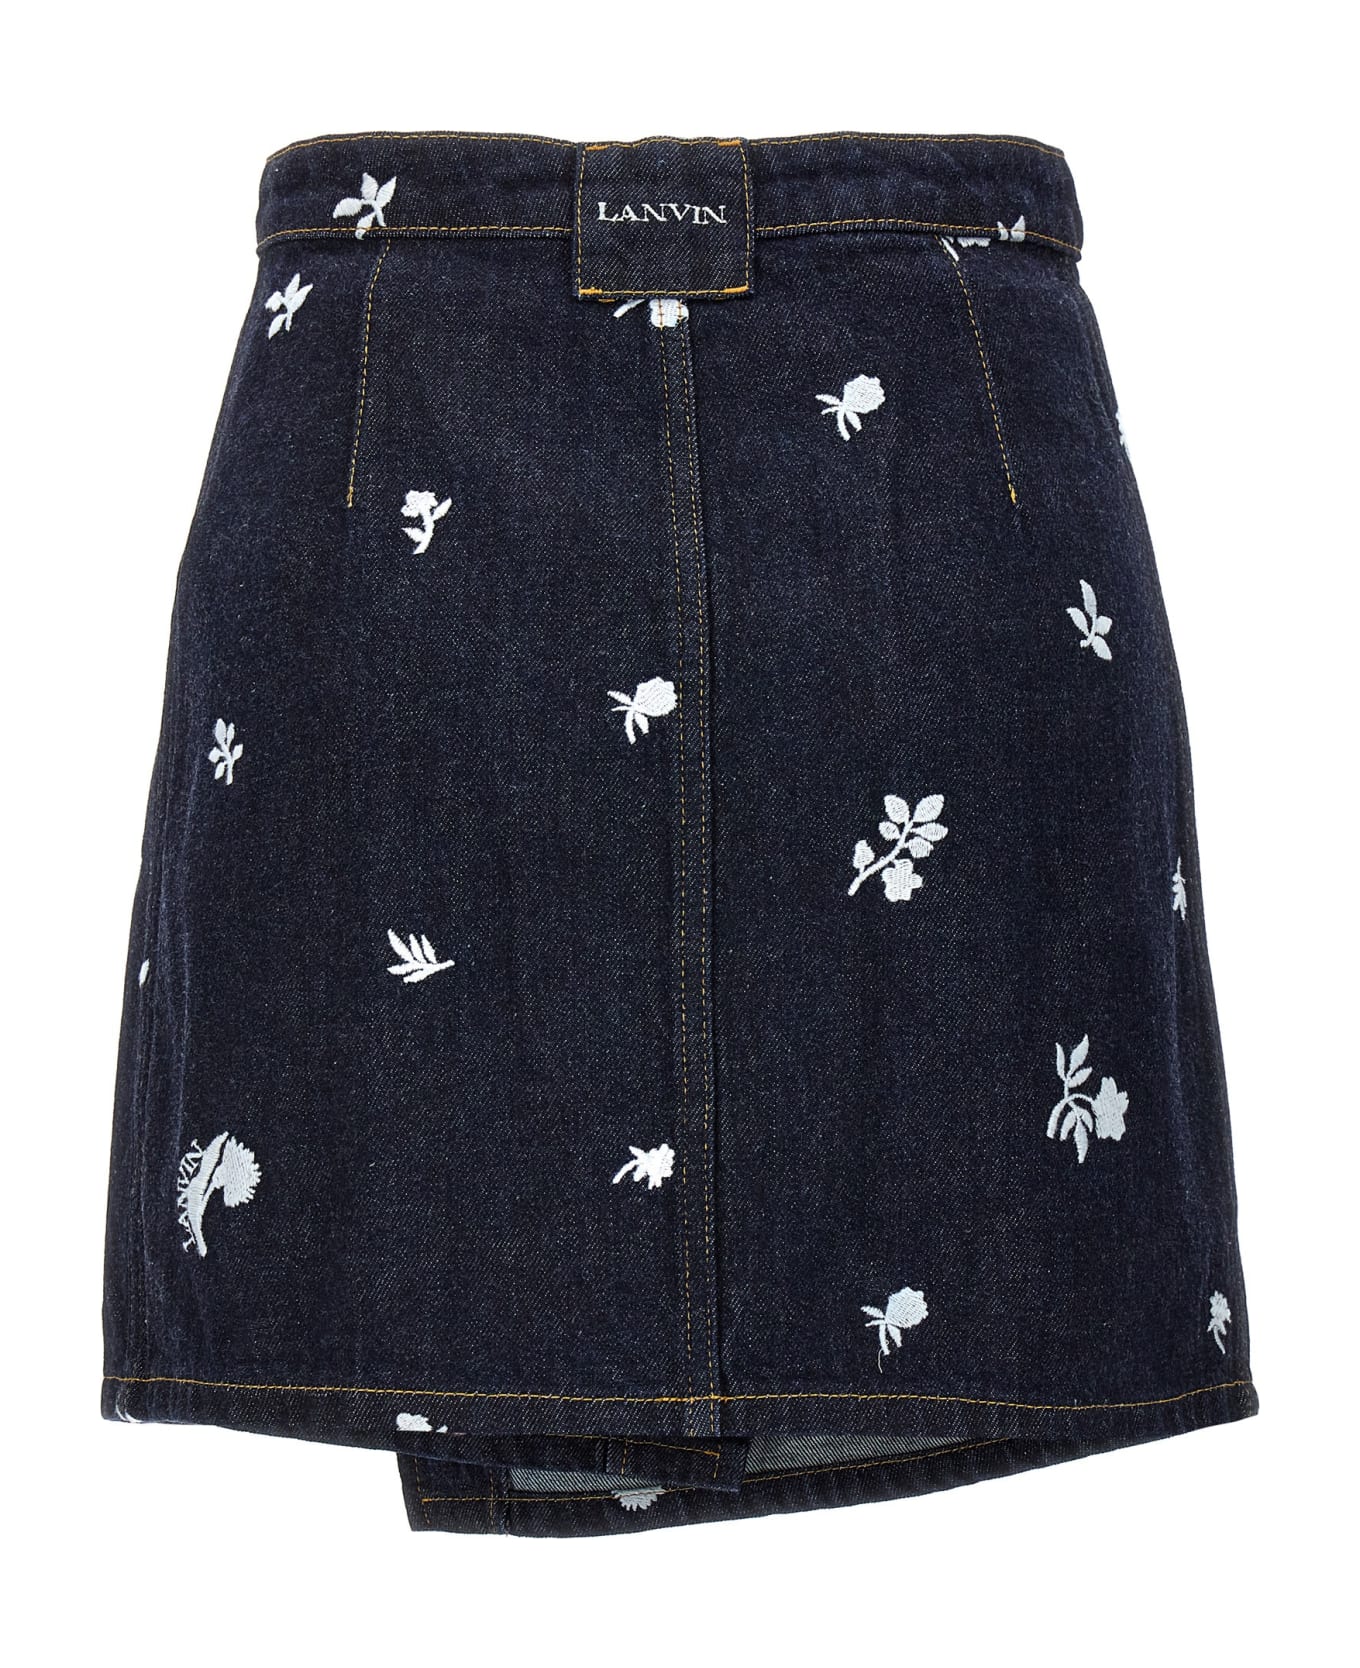 Lanvin All-over Embroidery Skirt - Navy Blue